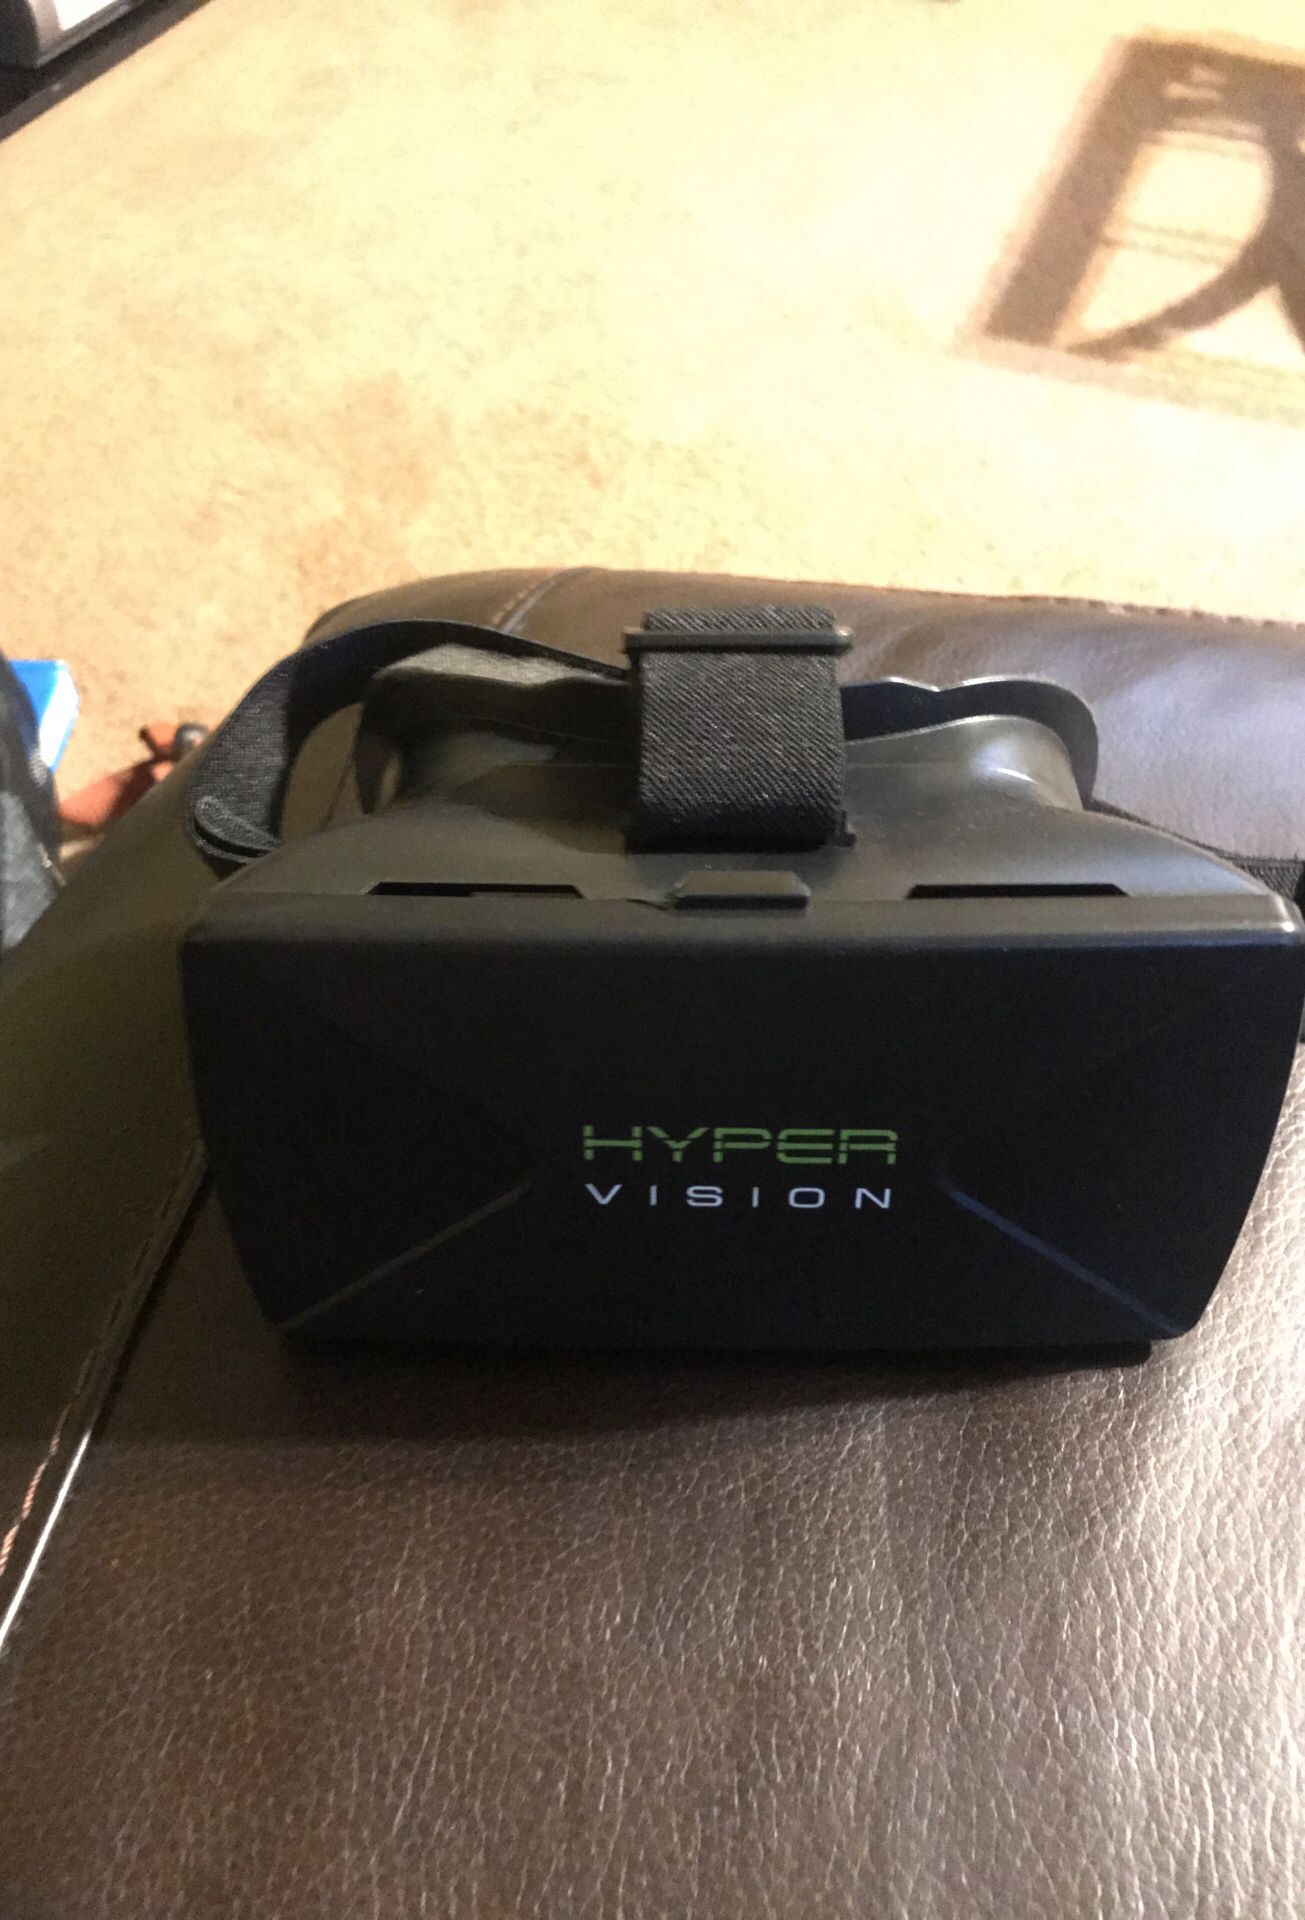 VR headset by Hyper Vision never used brand new works